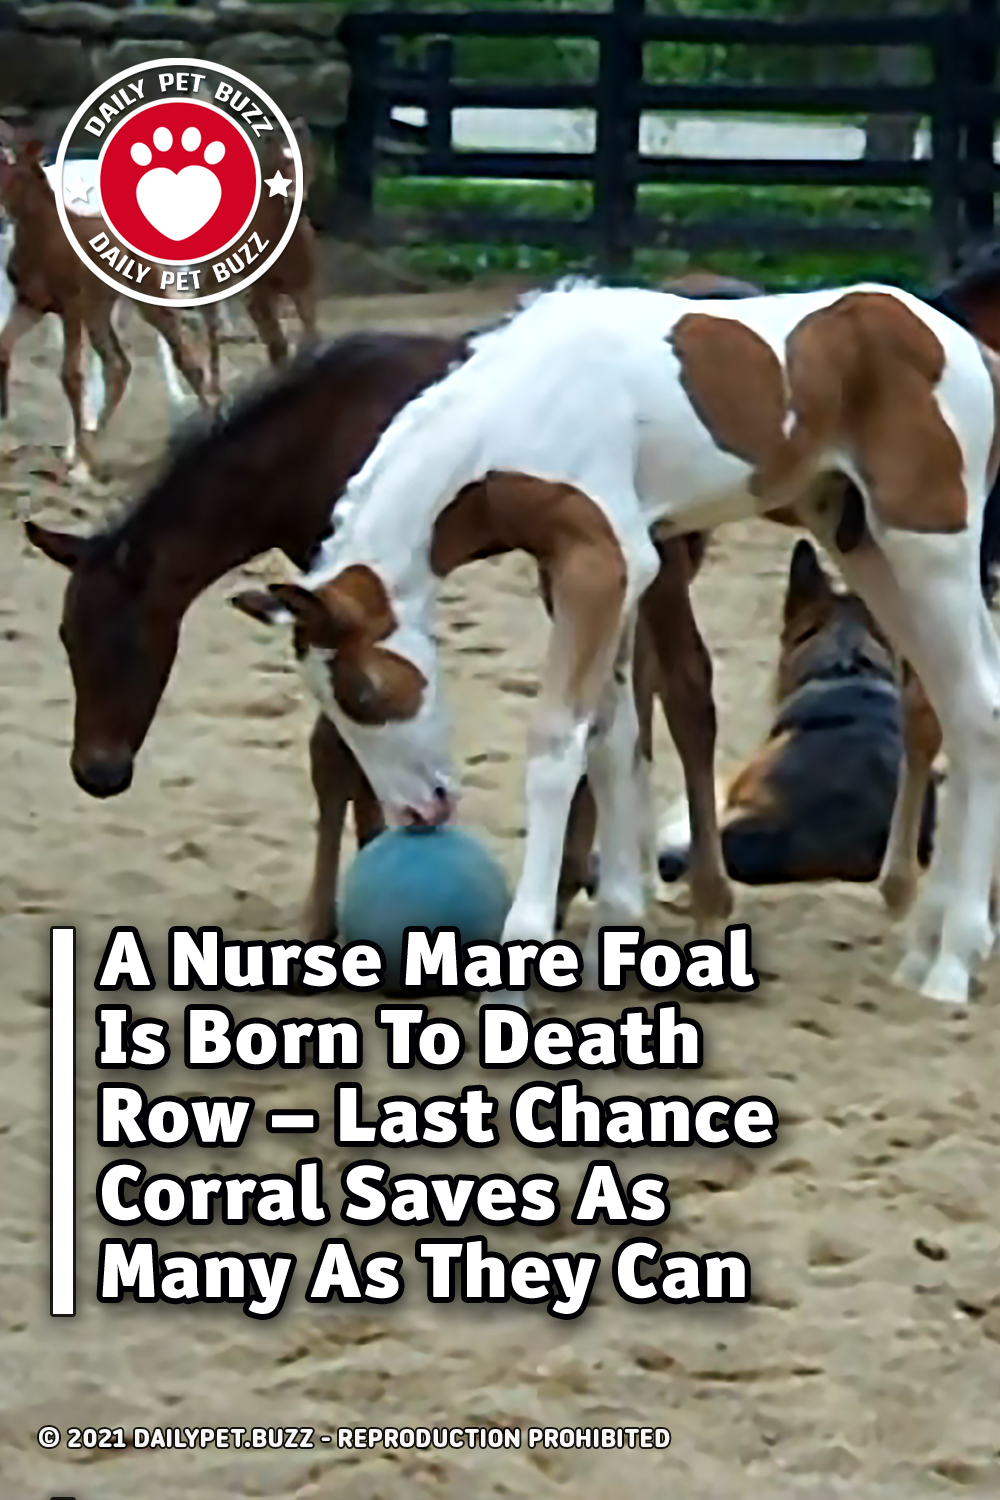 A Nurse Mare Foal Is Born To Death Row – Last Chance Corral Saves As Many As They Can